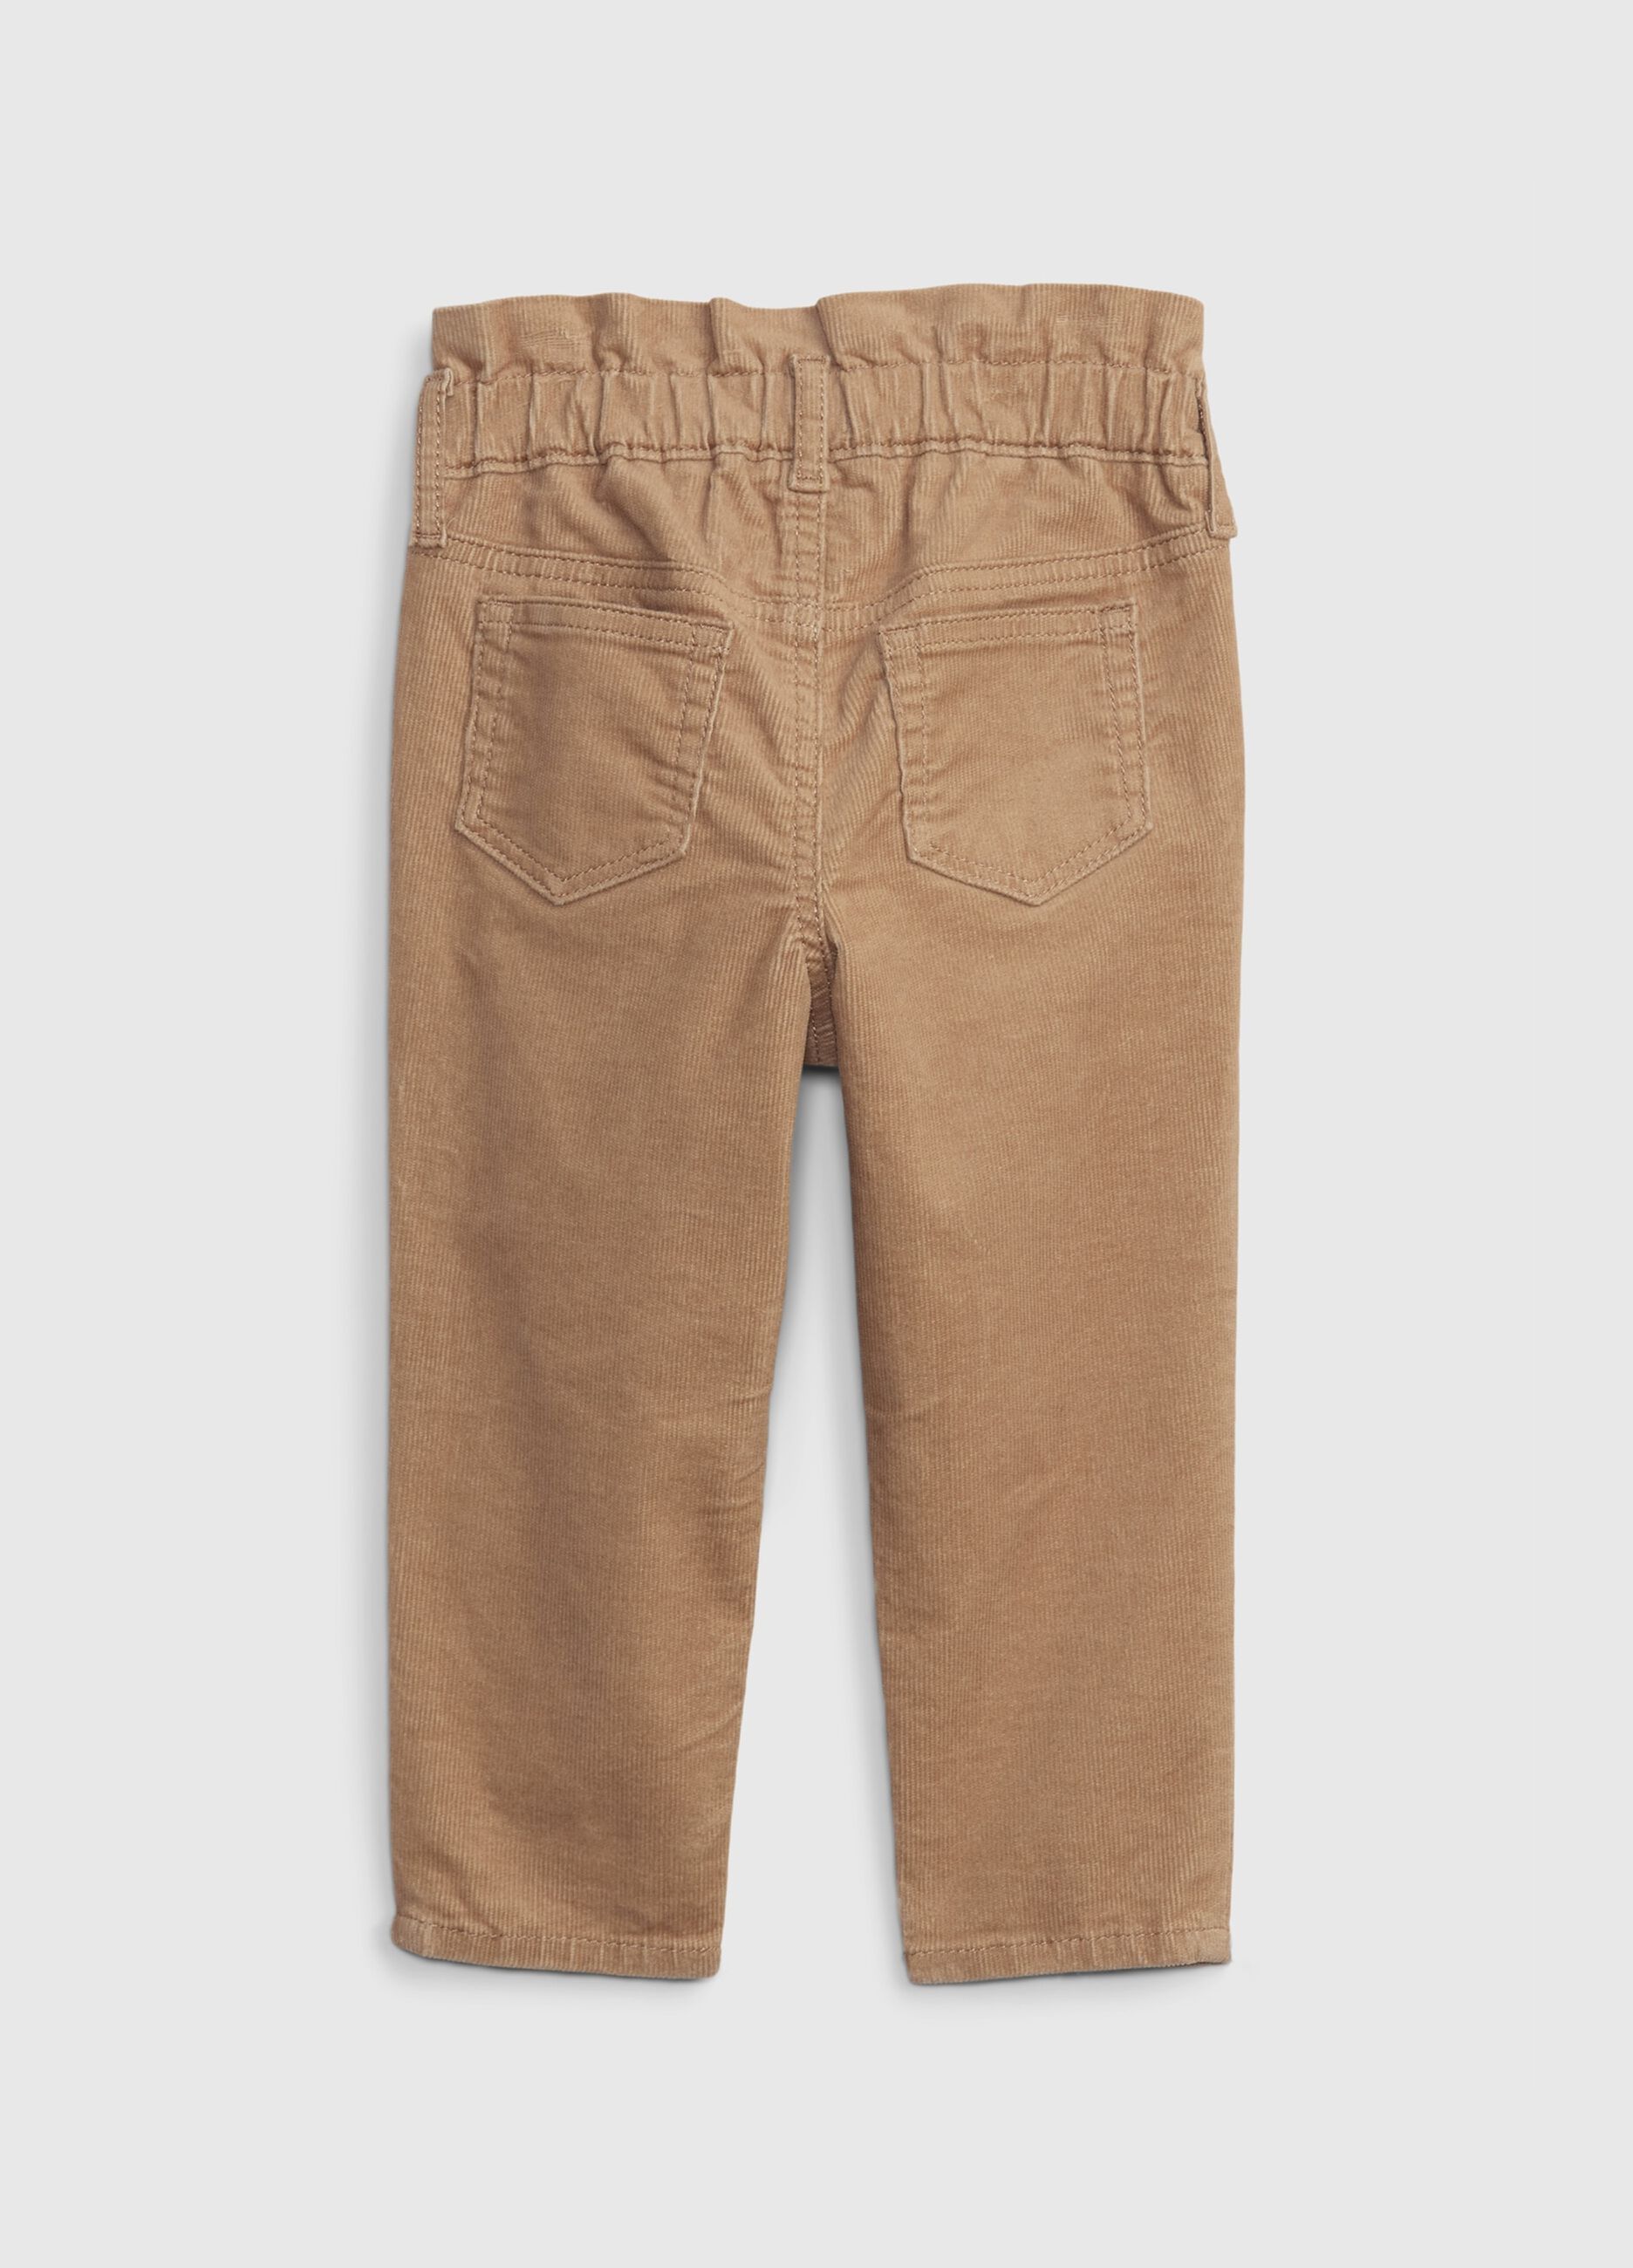 Mum-fit trousers in corduroy